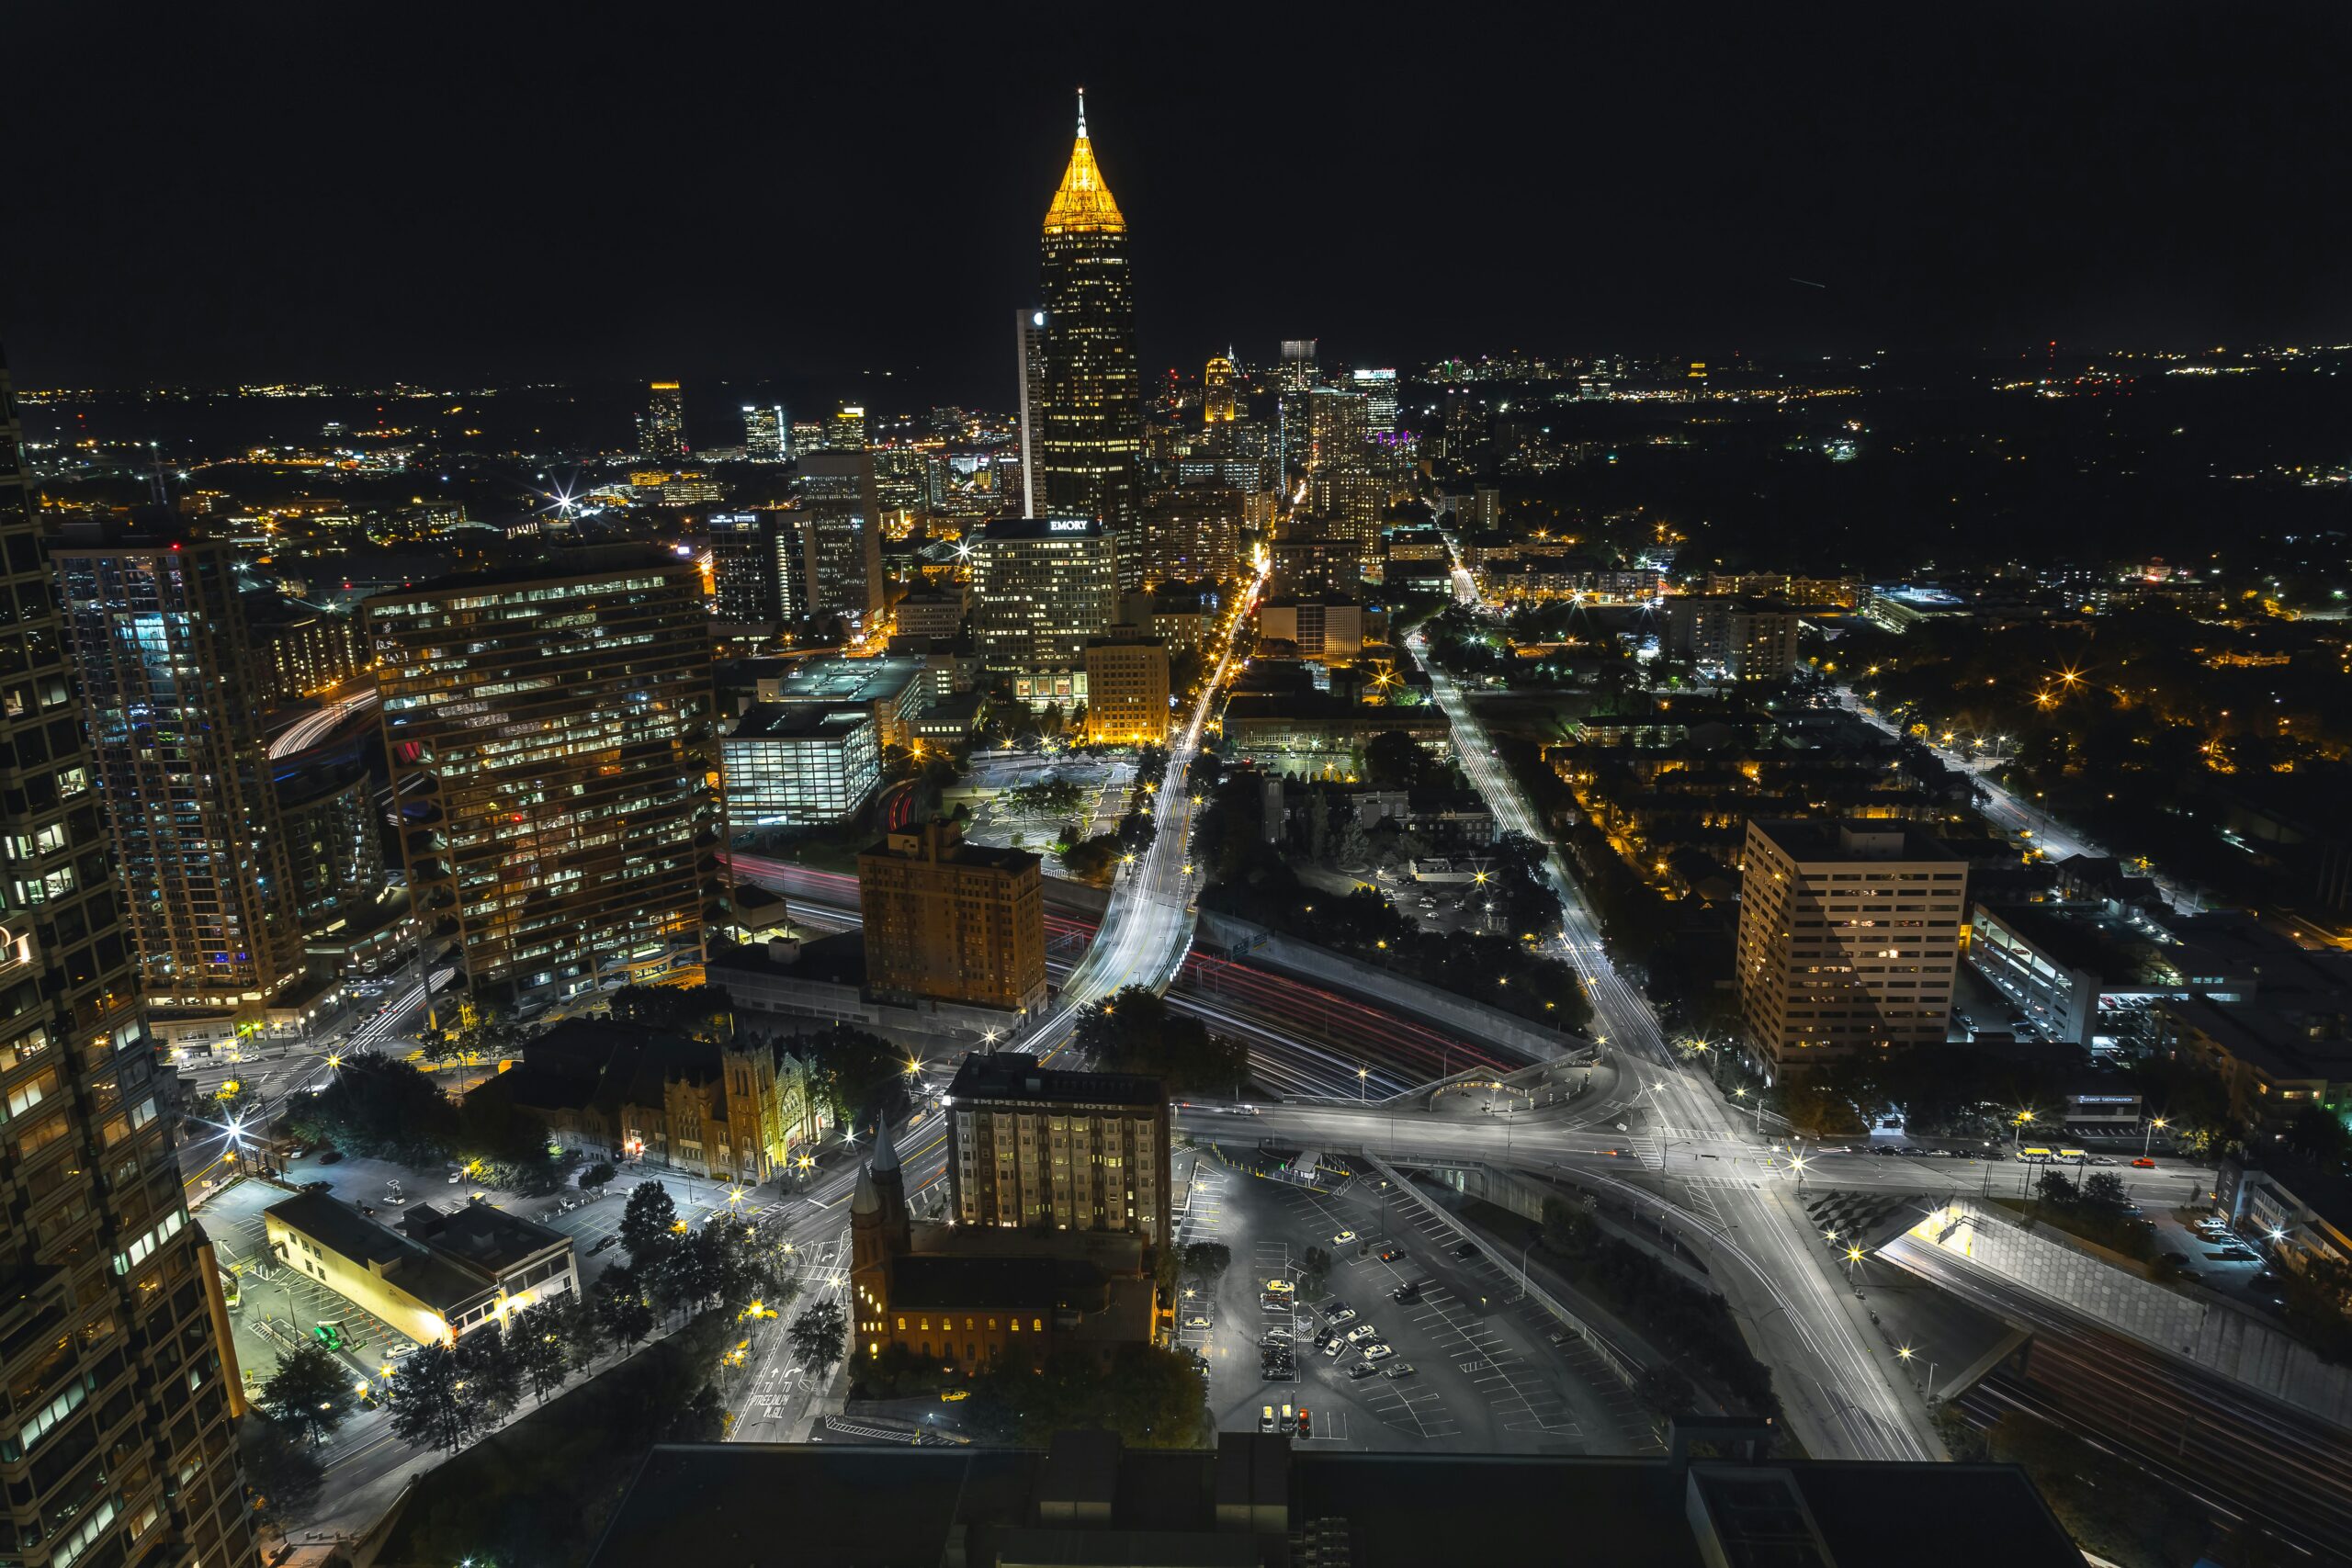 As the largest city in Georgia, Atlanta is one of the most gay friendly cities in the U.S. and in the south. Pictured: A night view of the city in Atlanta